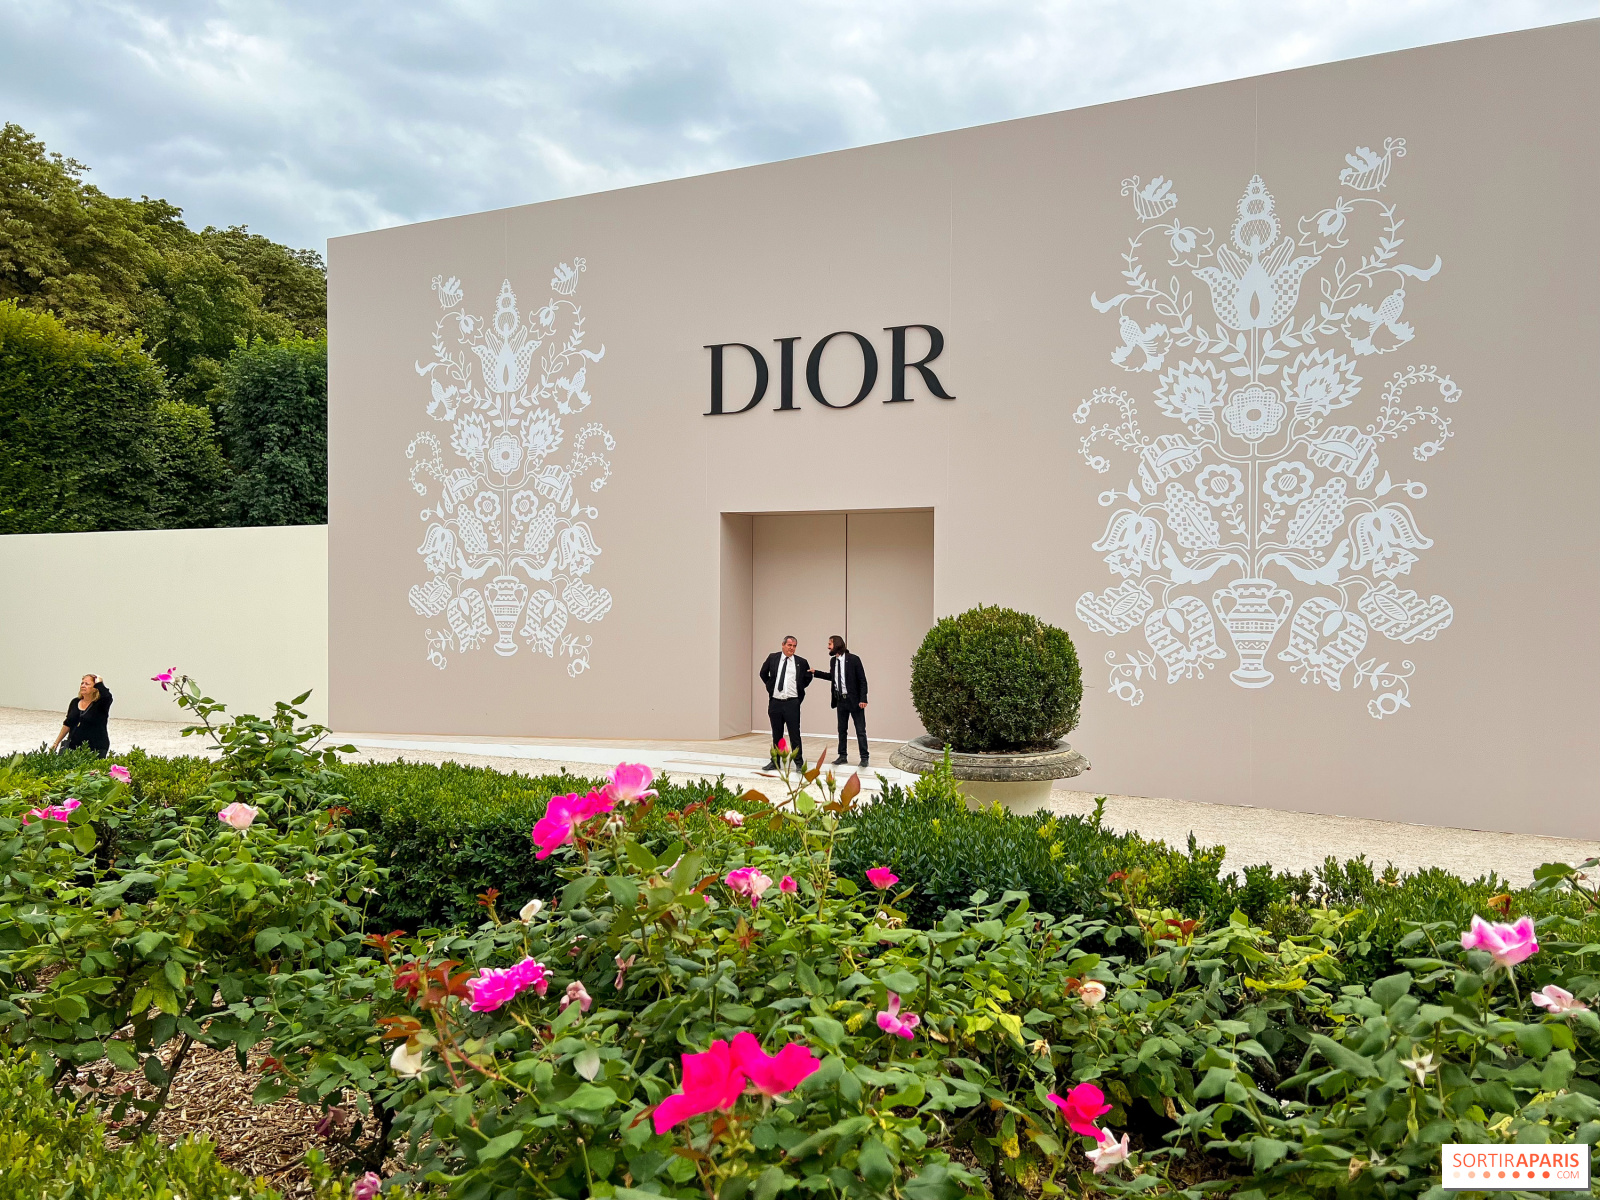 Dior Fashion Week Show - Celebs Attend The Exciting Catwalk Show